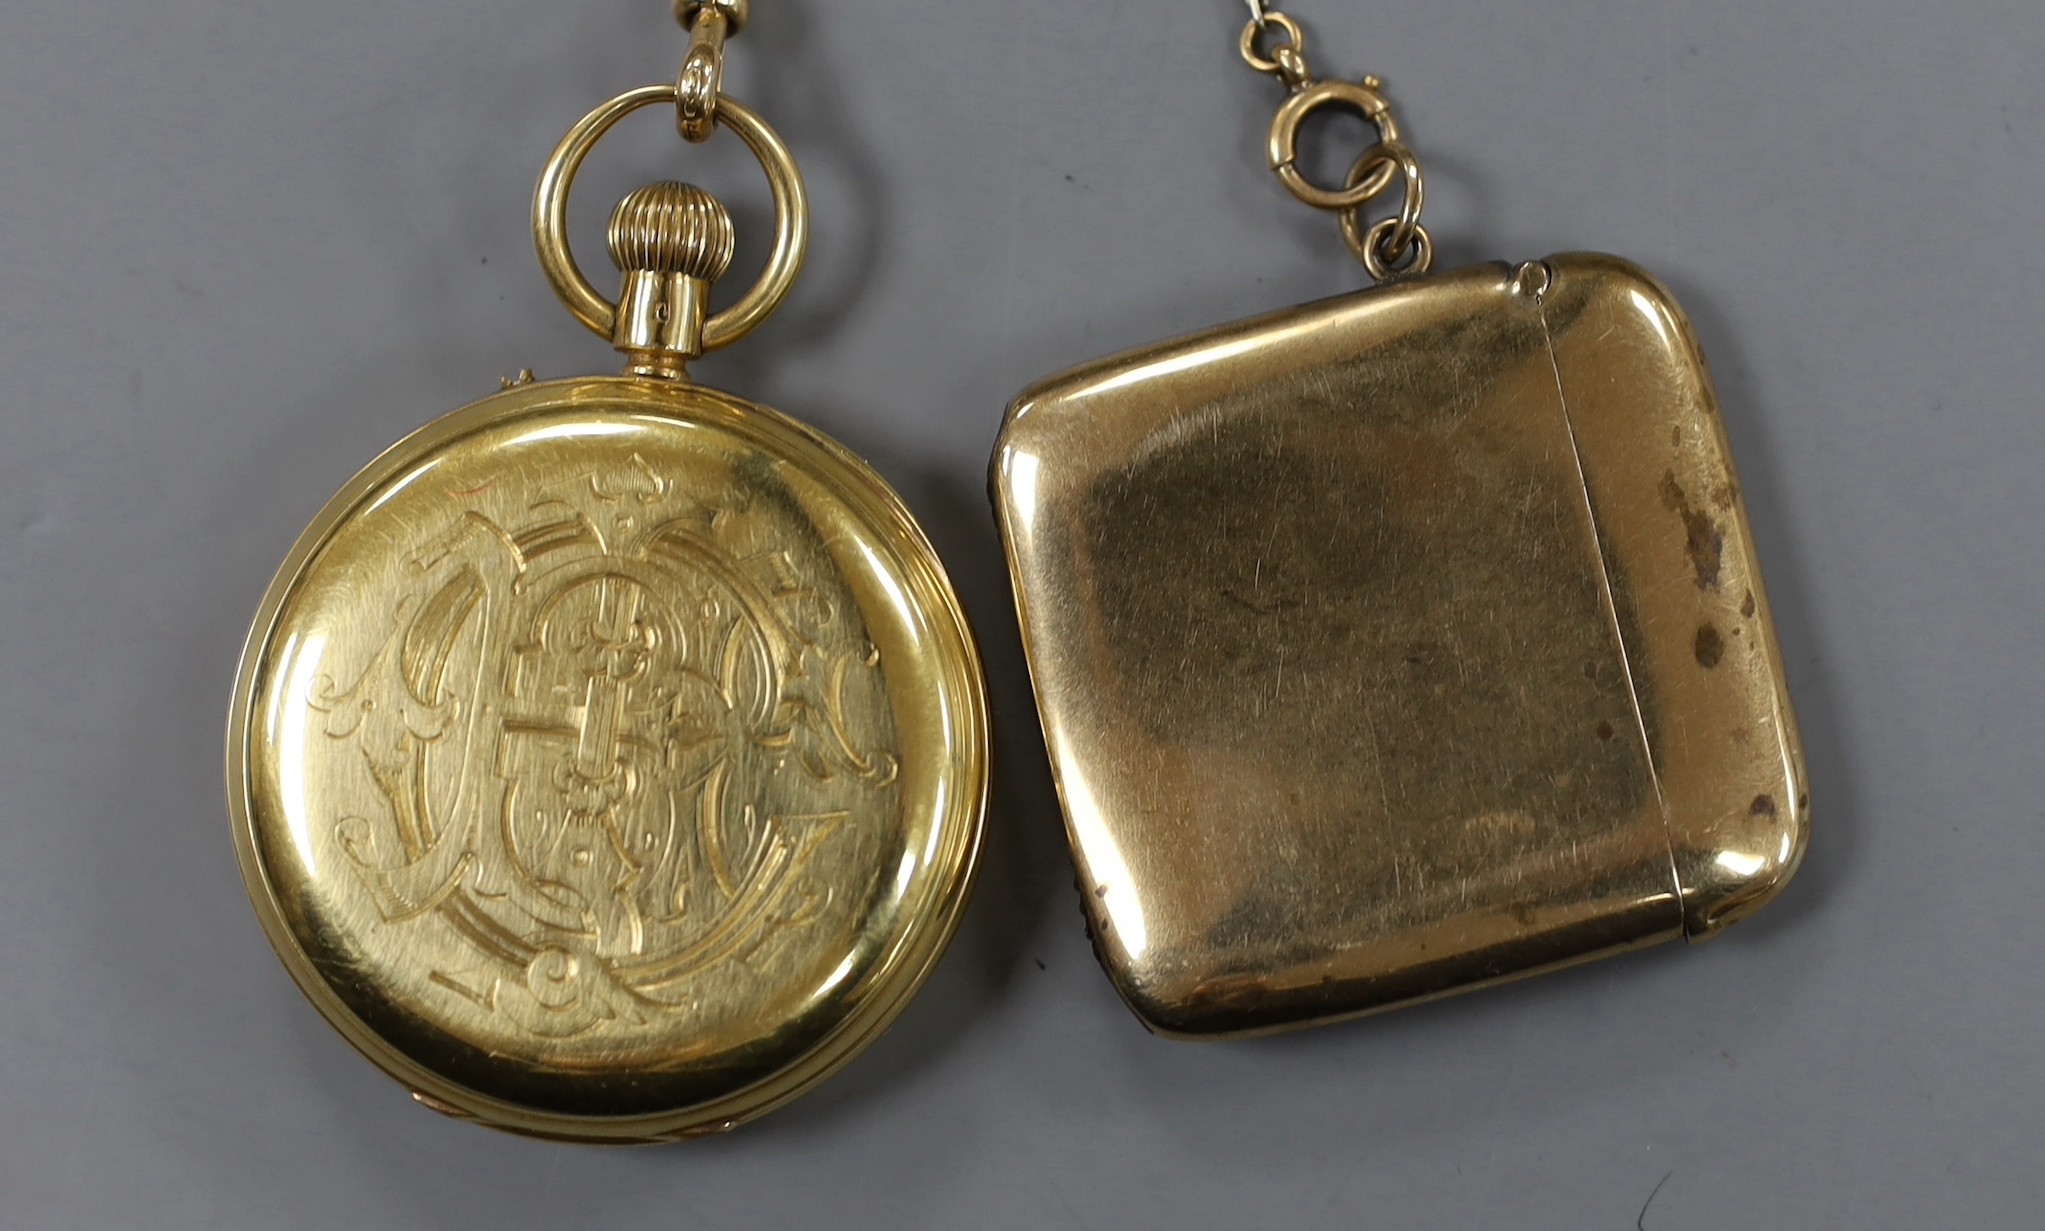 An 18ct gold open faced keyless pocket watch, by R.H. Saxton of Buxton, with Roman dial and engraved monogram to the case back, case diameter 50mm, together with a two colour 18ct albert and a George V 9ct gold vesta cas